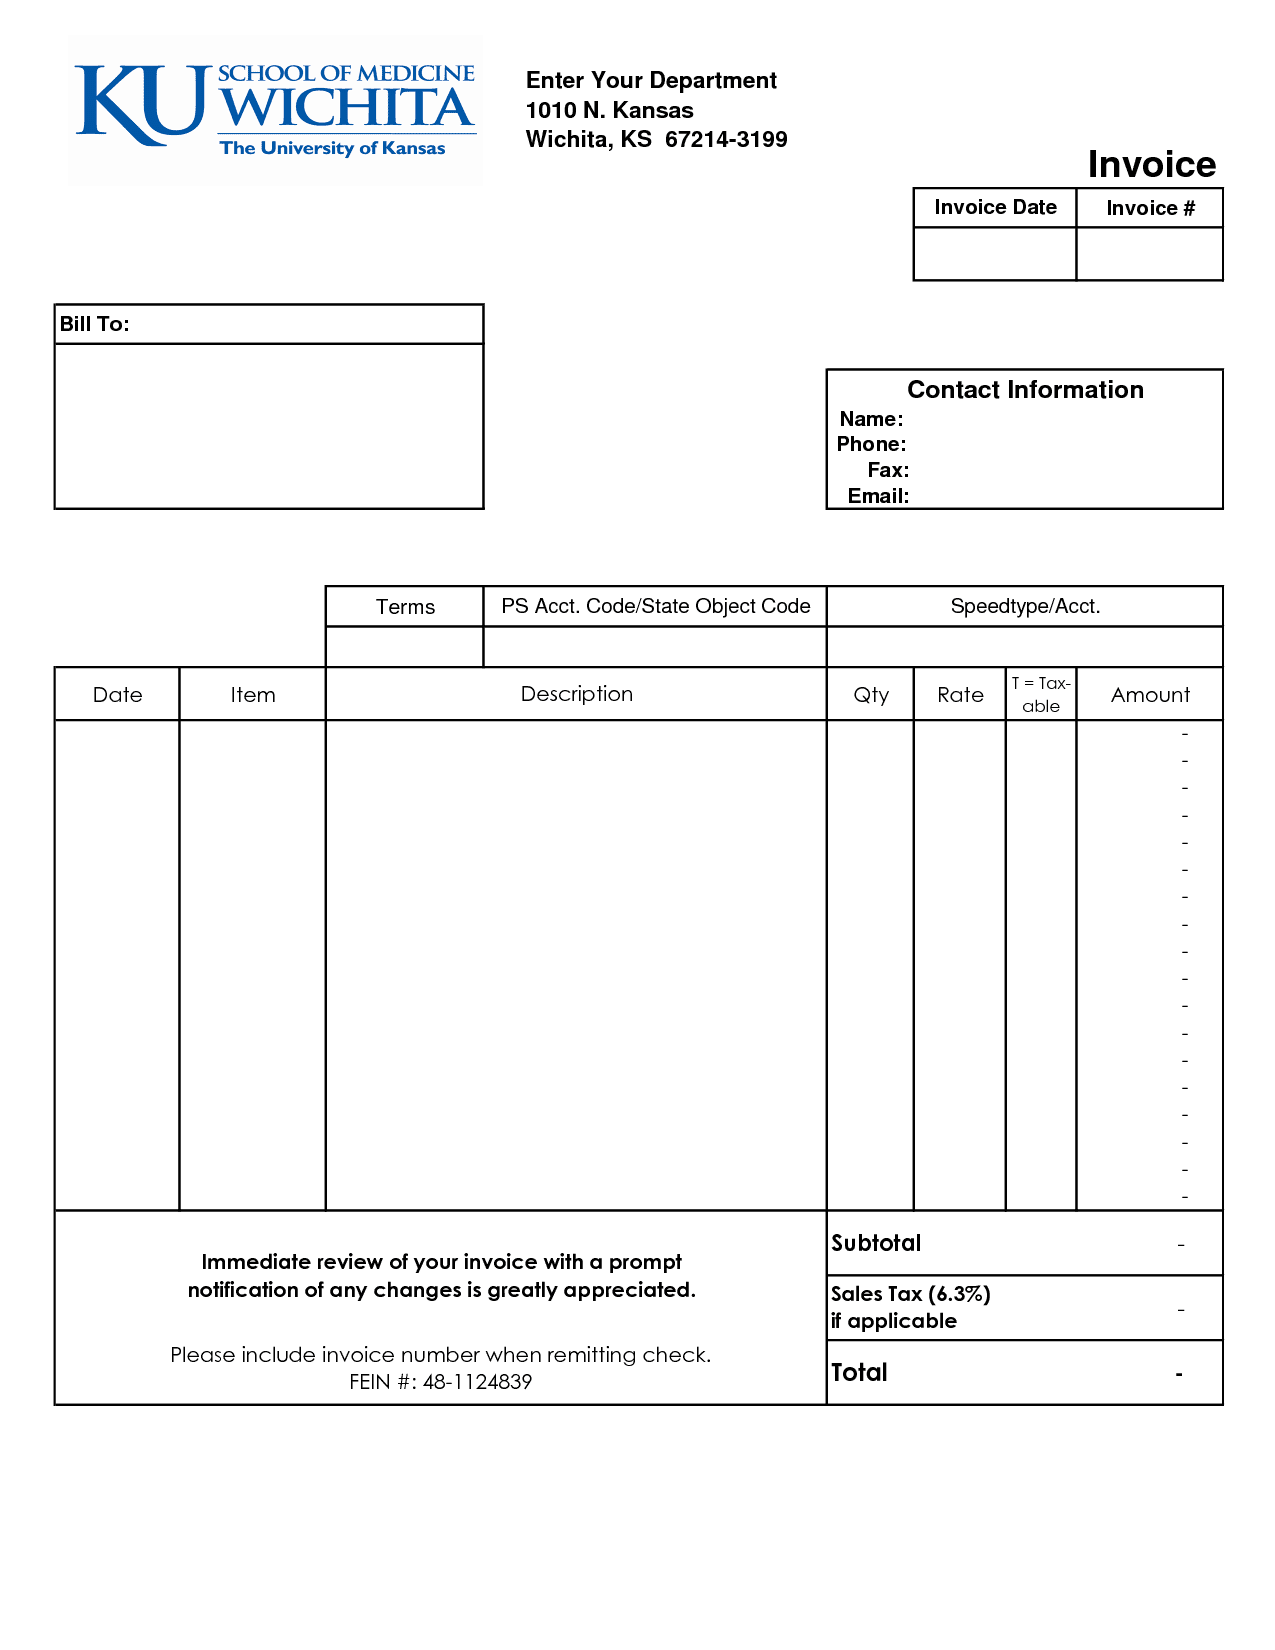 Blank Invoice Template Excel Free Excel Templates